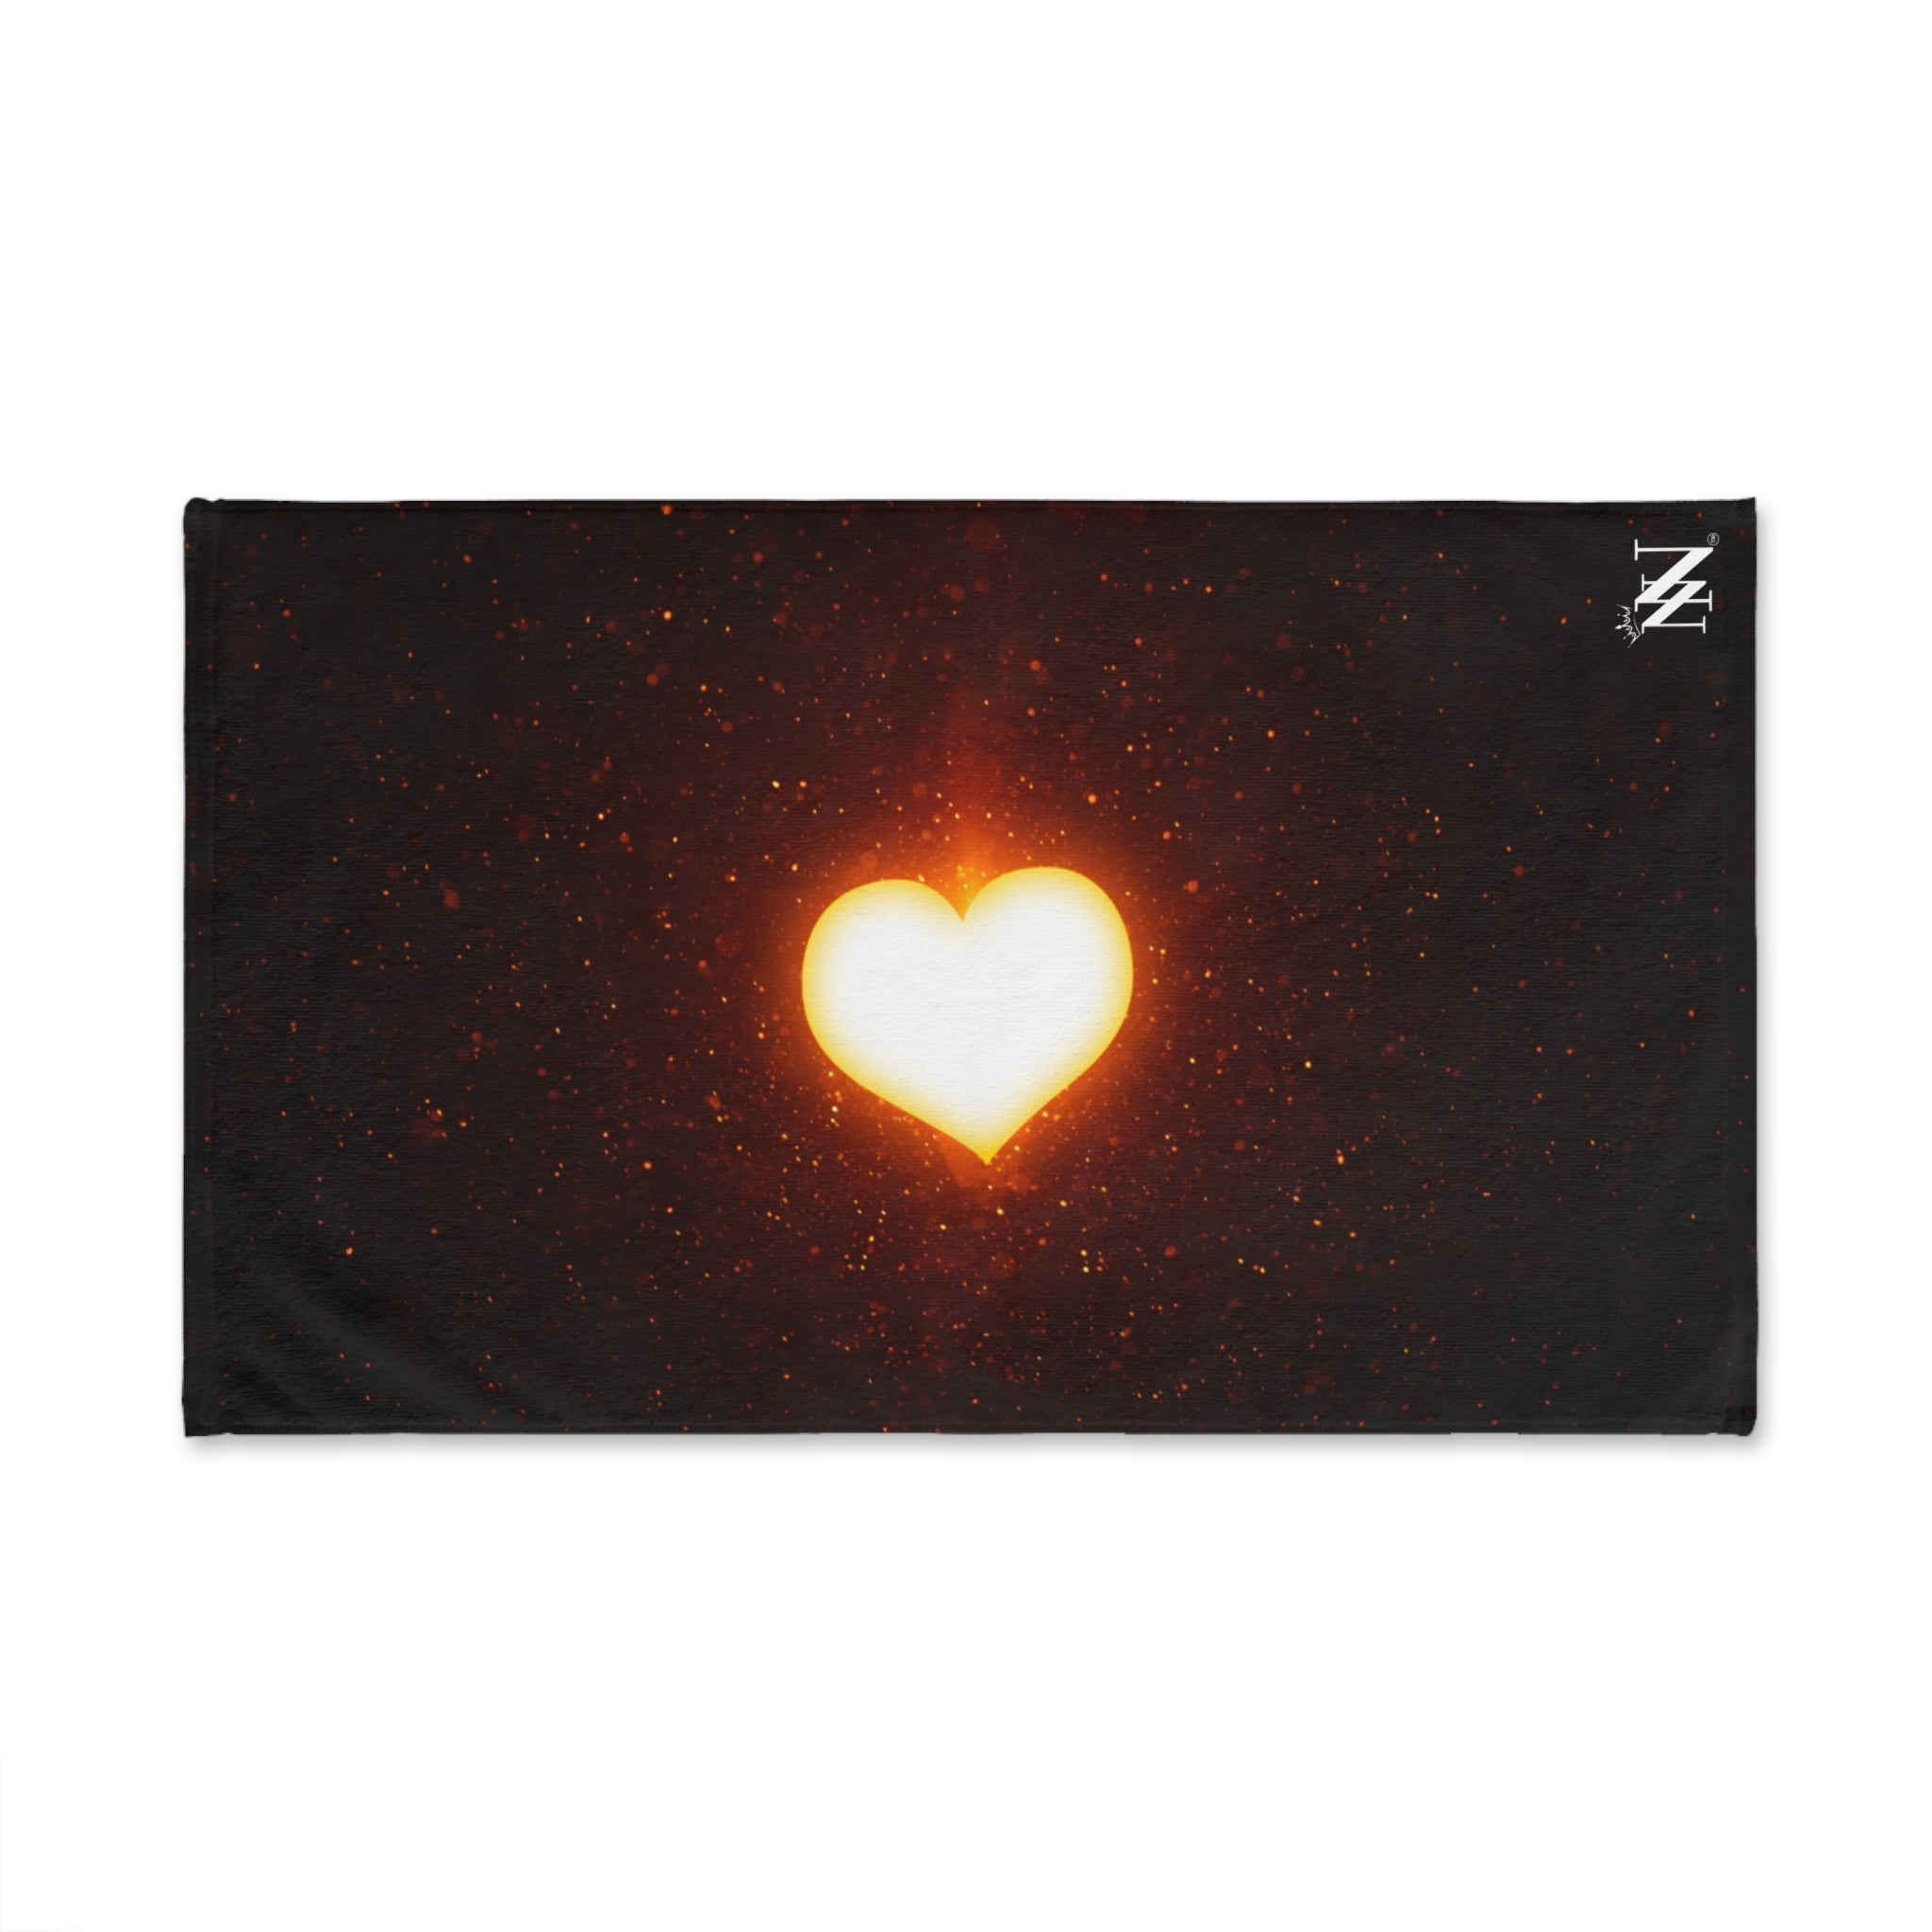 Sun Heart Shine White | Funny Gifts for Men - Gifts for Him - Birthday Gifts for Men, Him, Her, Husband, Boyfriend, Girlfriend, New Couple Gifts, Fathers & Valentines Day Gifts, Christmas Gifts NECTAR NAPKINS